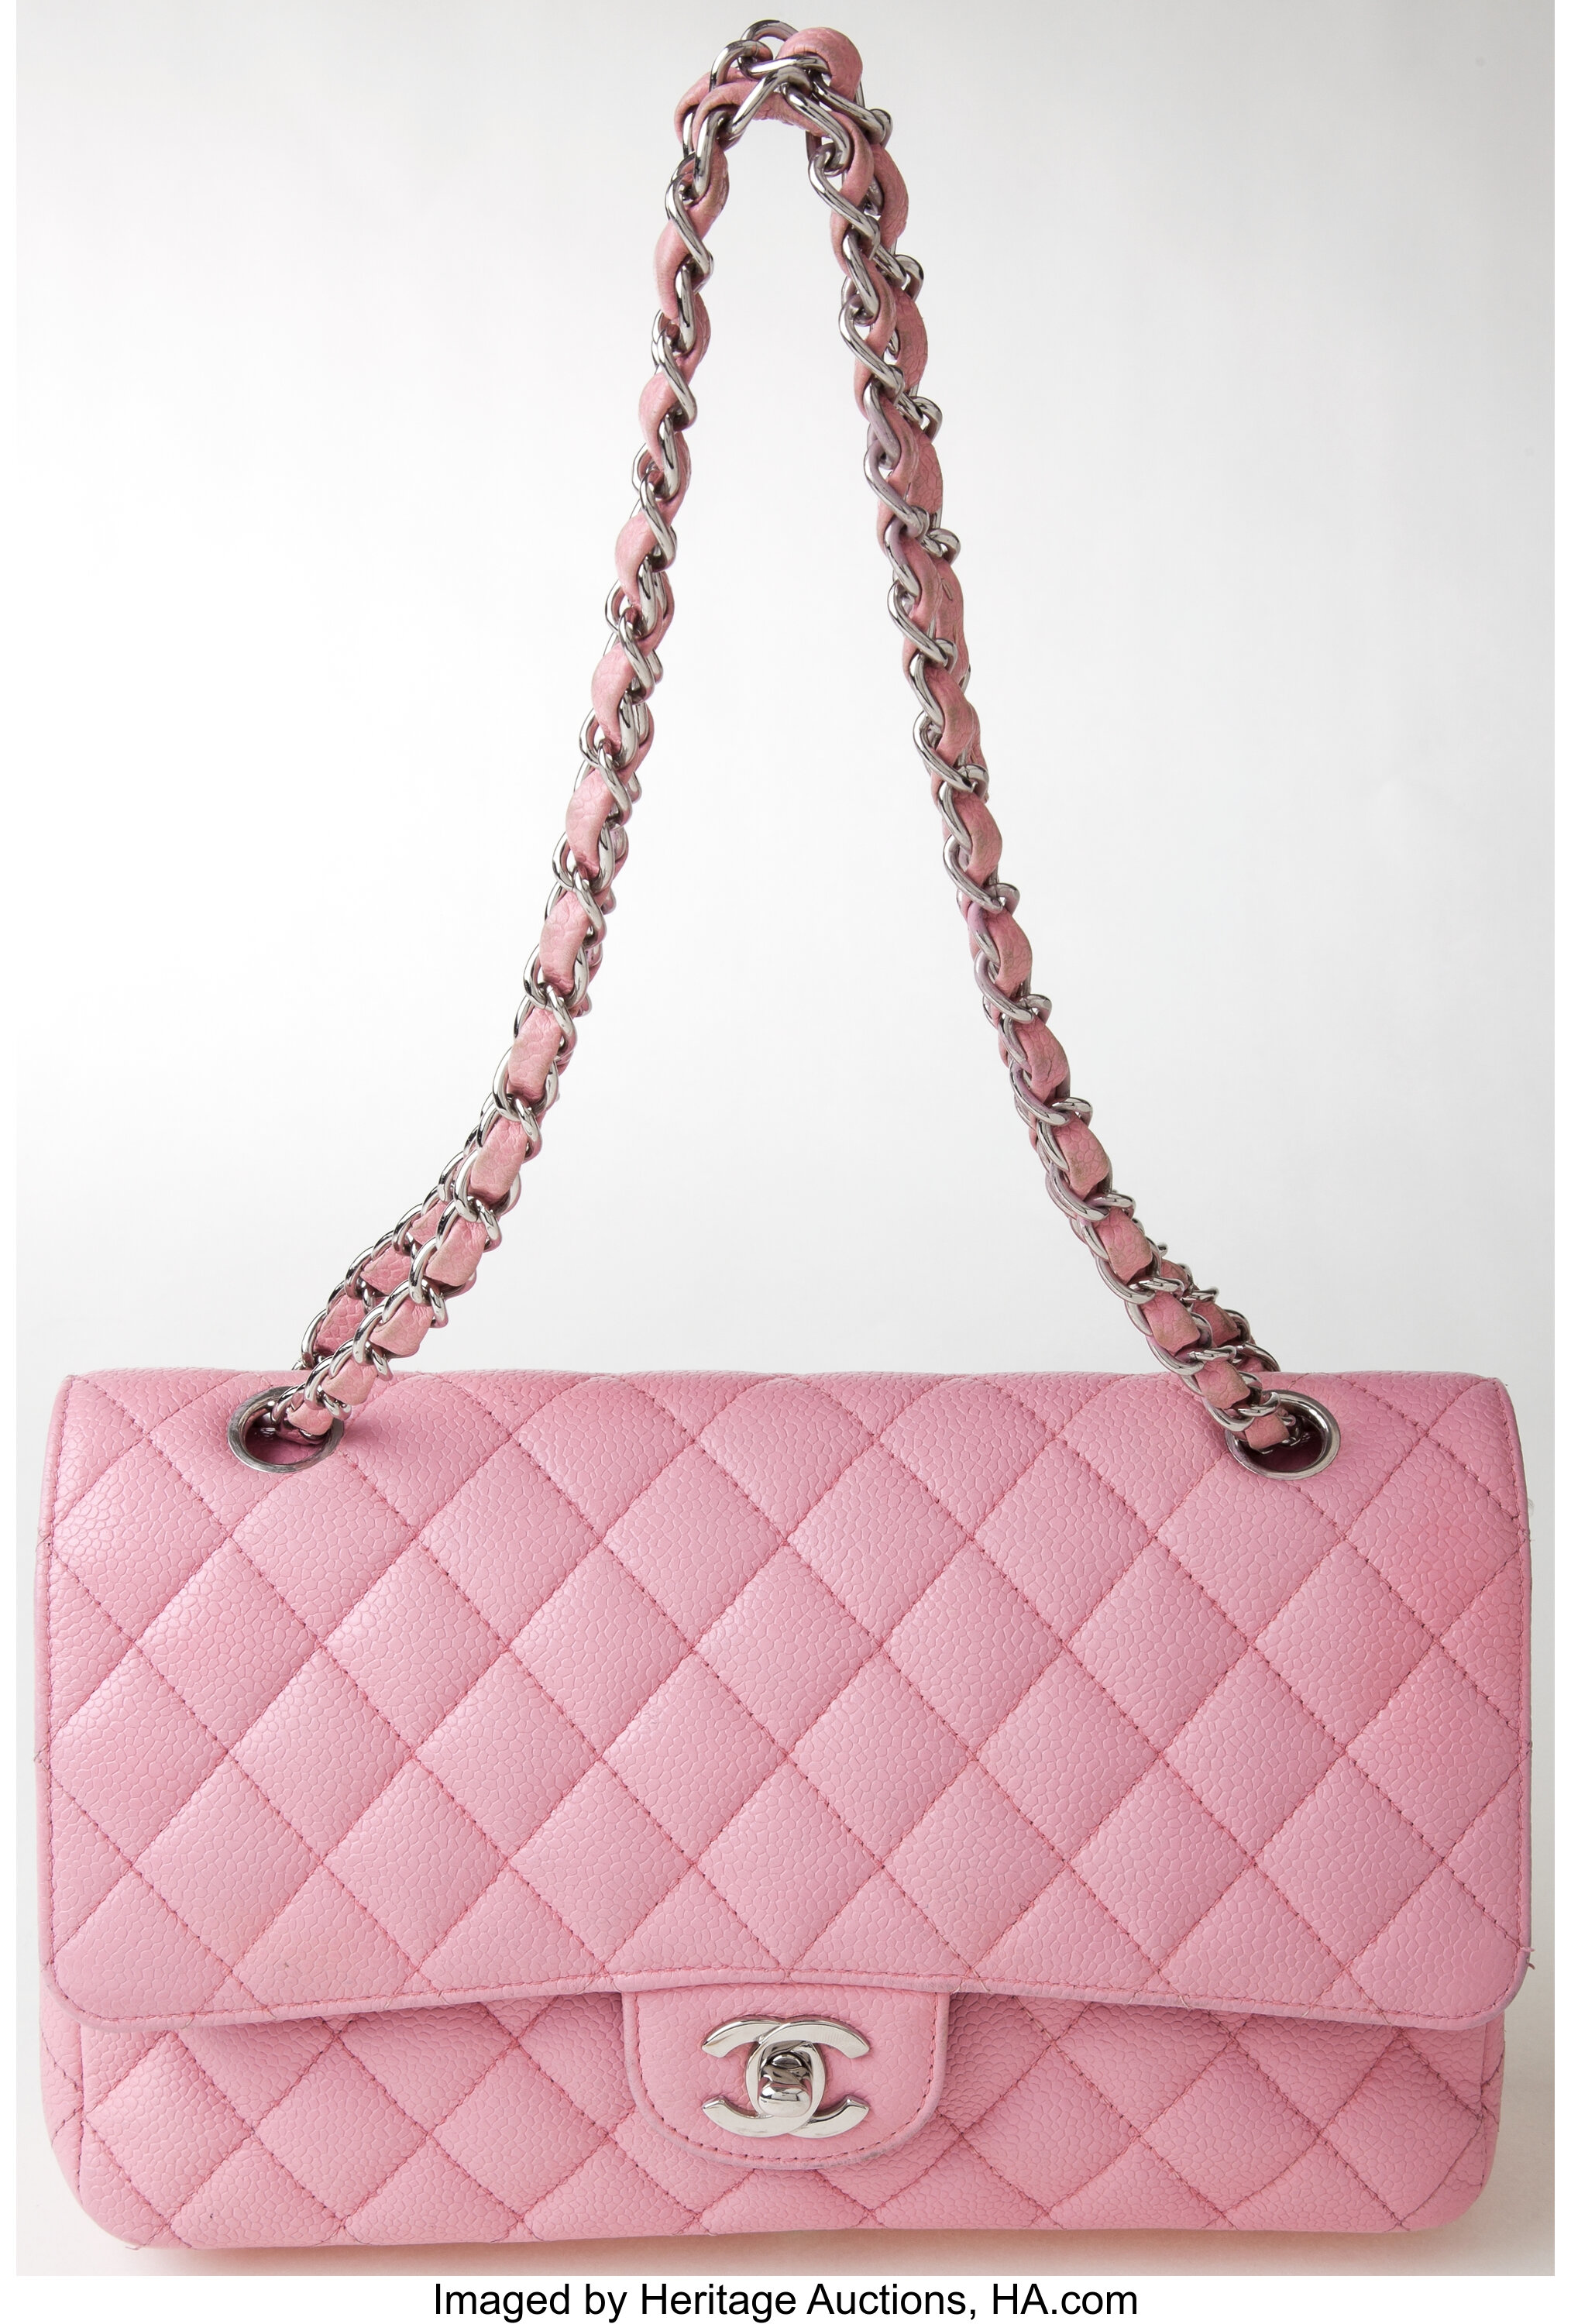 Heritage Vintage: Chanel Pink Caviar Double Flap Bag with Silver